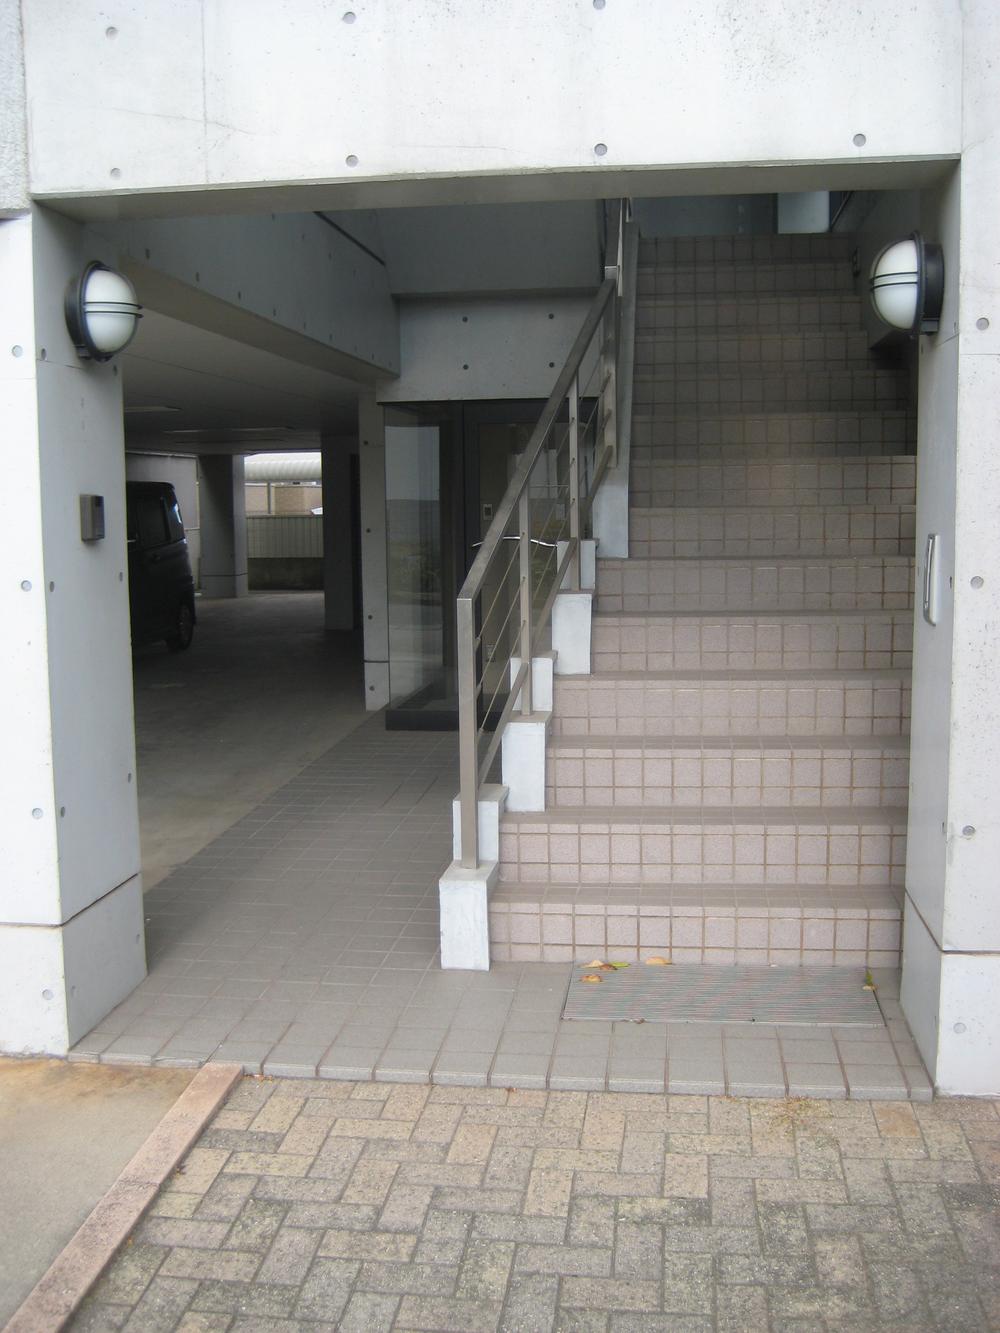 Local appearance photo. Entrance stairs